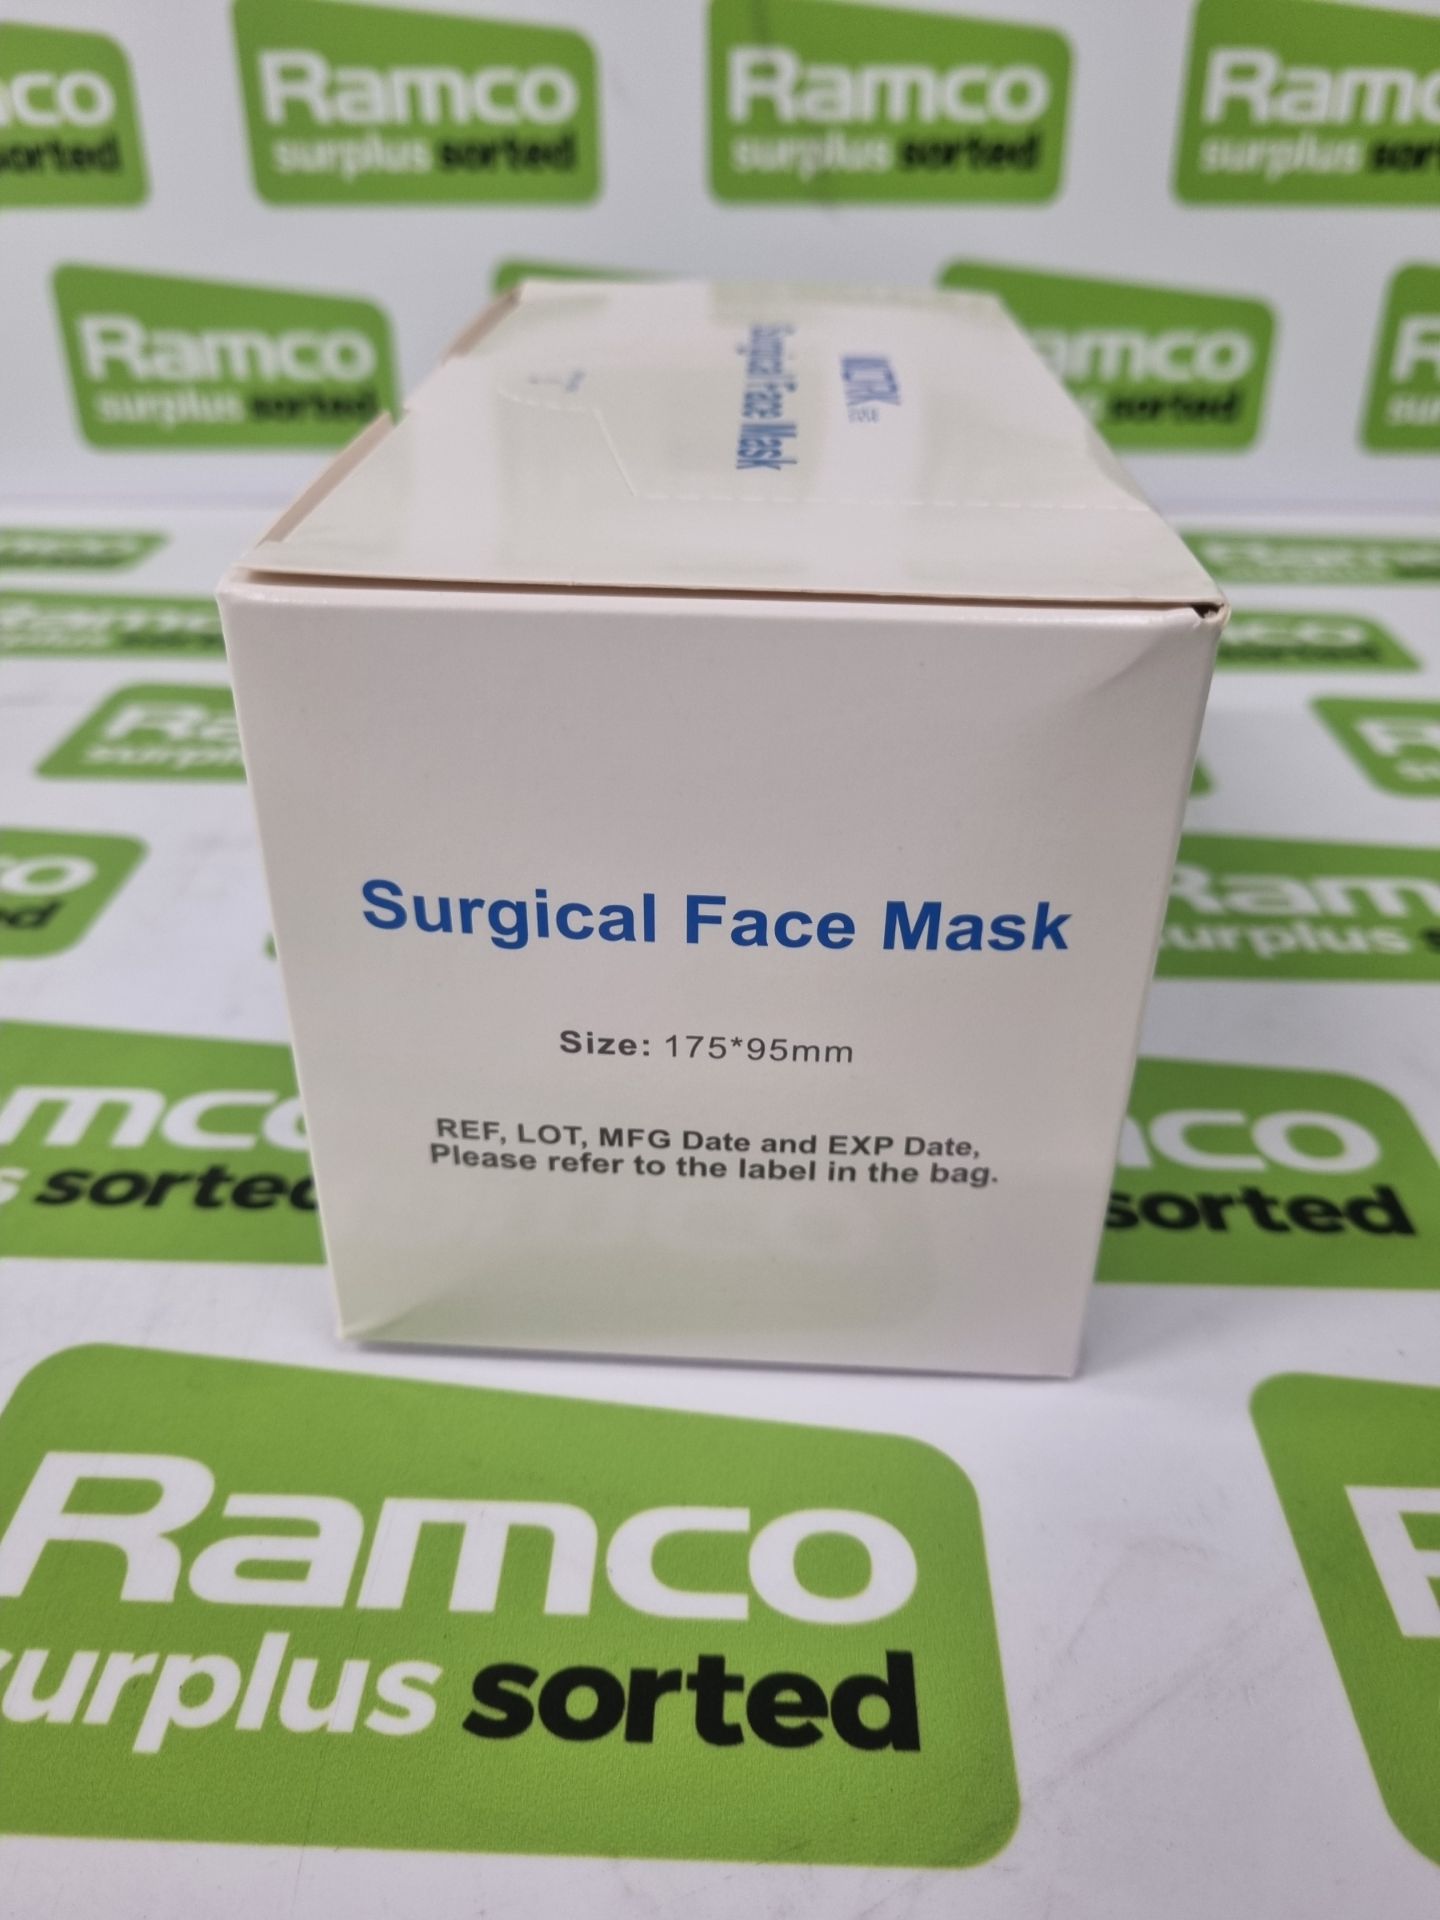 24x pallets of Type IIR face masks - est. total qty 480000 - location LE67 1ND - PPE - Image 5 of 9